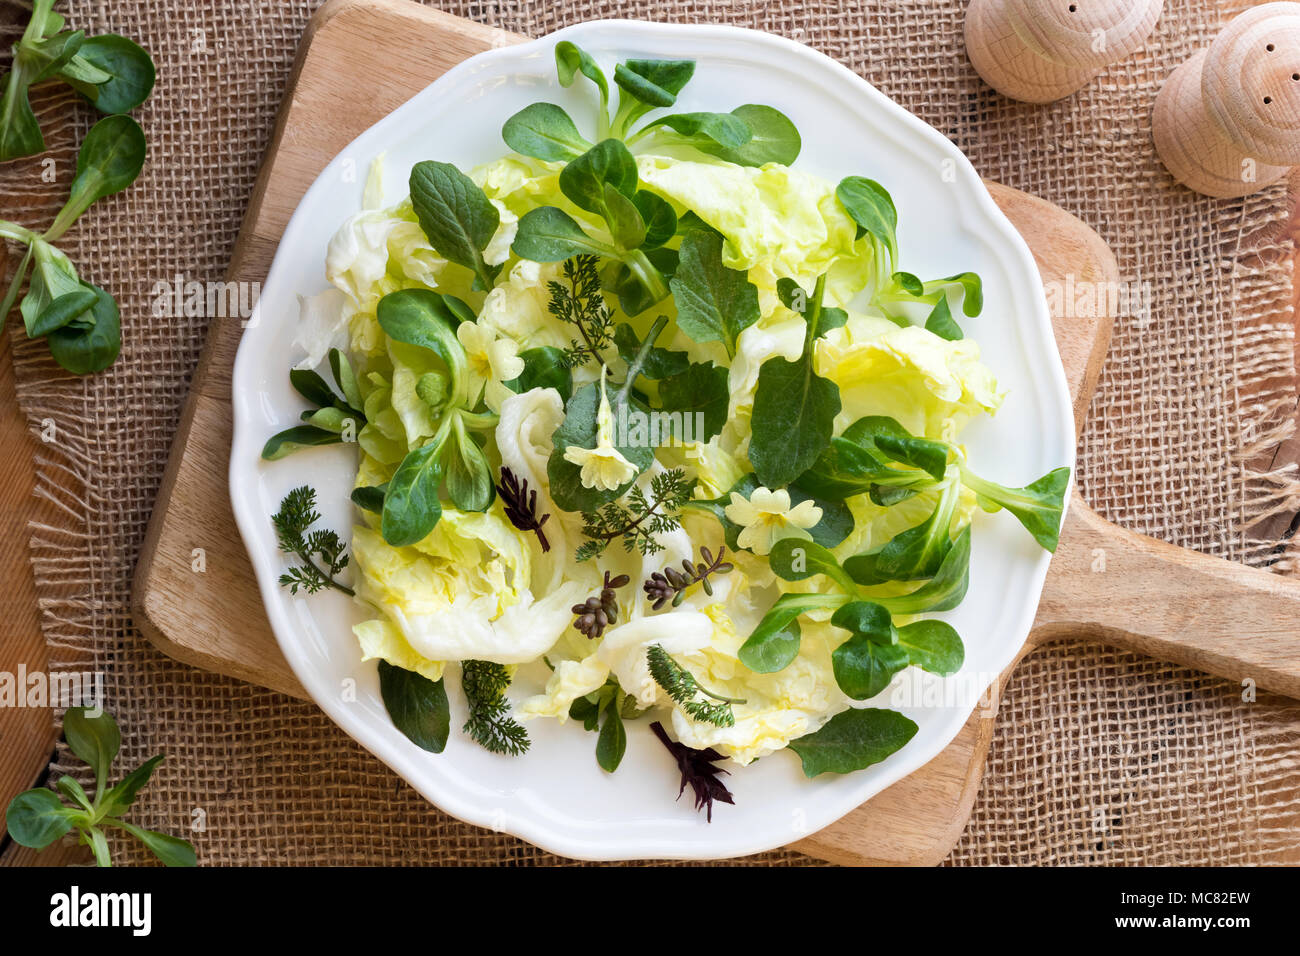 Spring salad with primula flowers, young nipplewort leaves and other wild edible plants Stock Photo